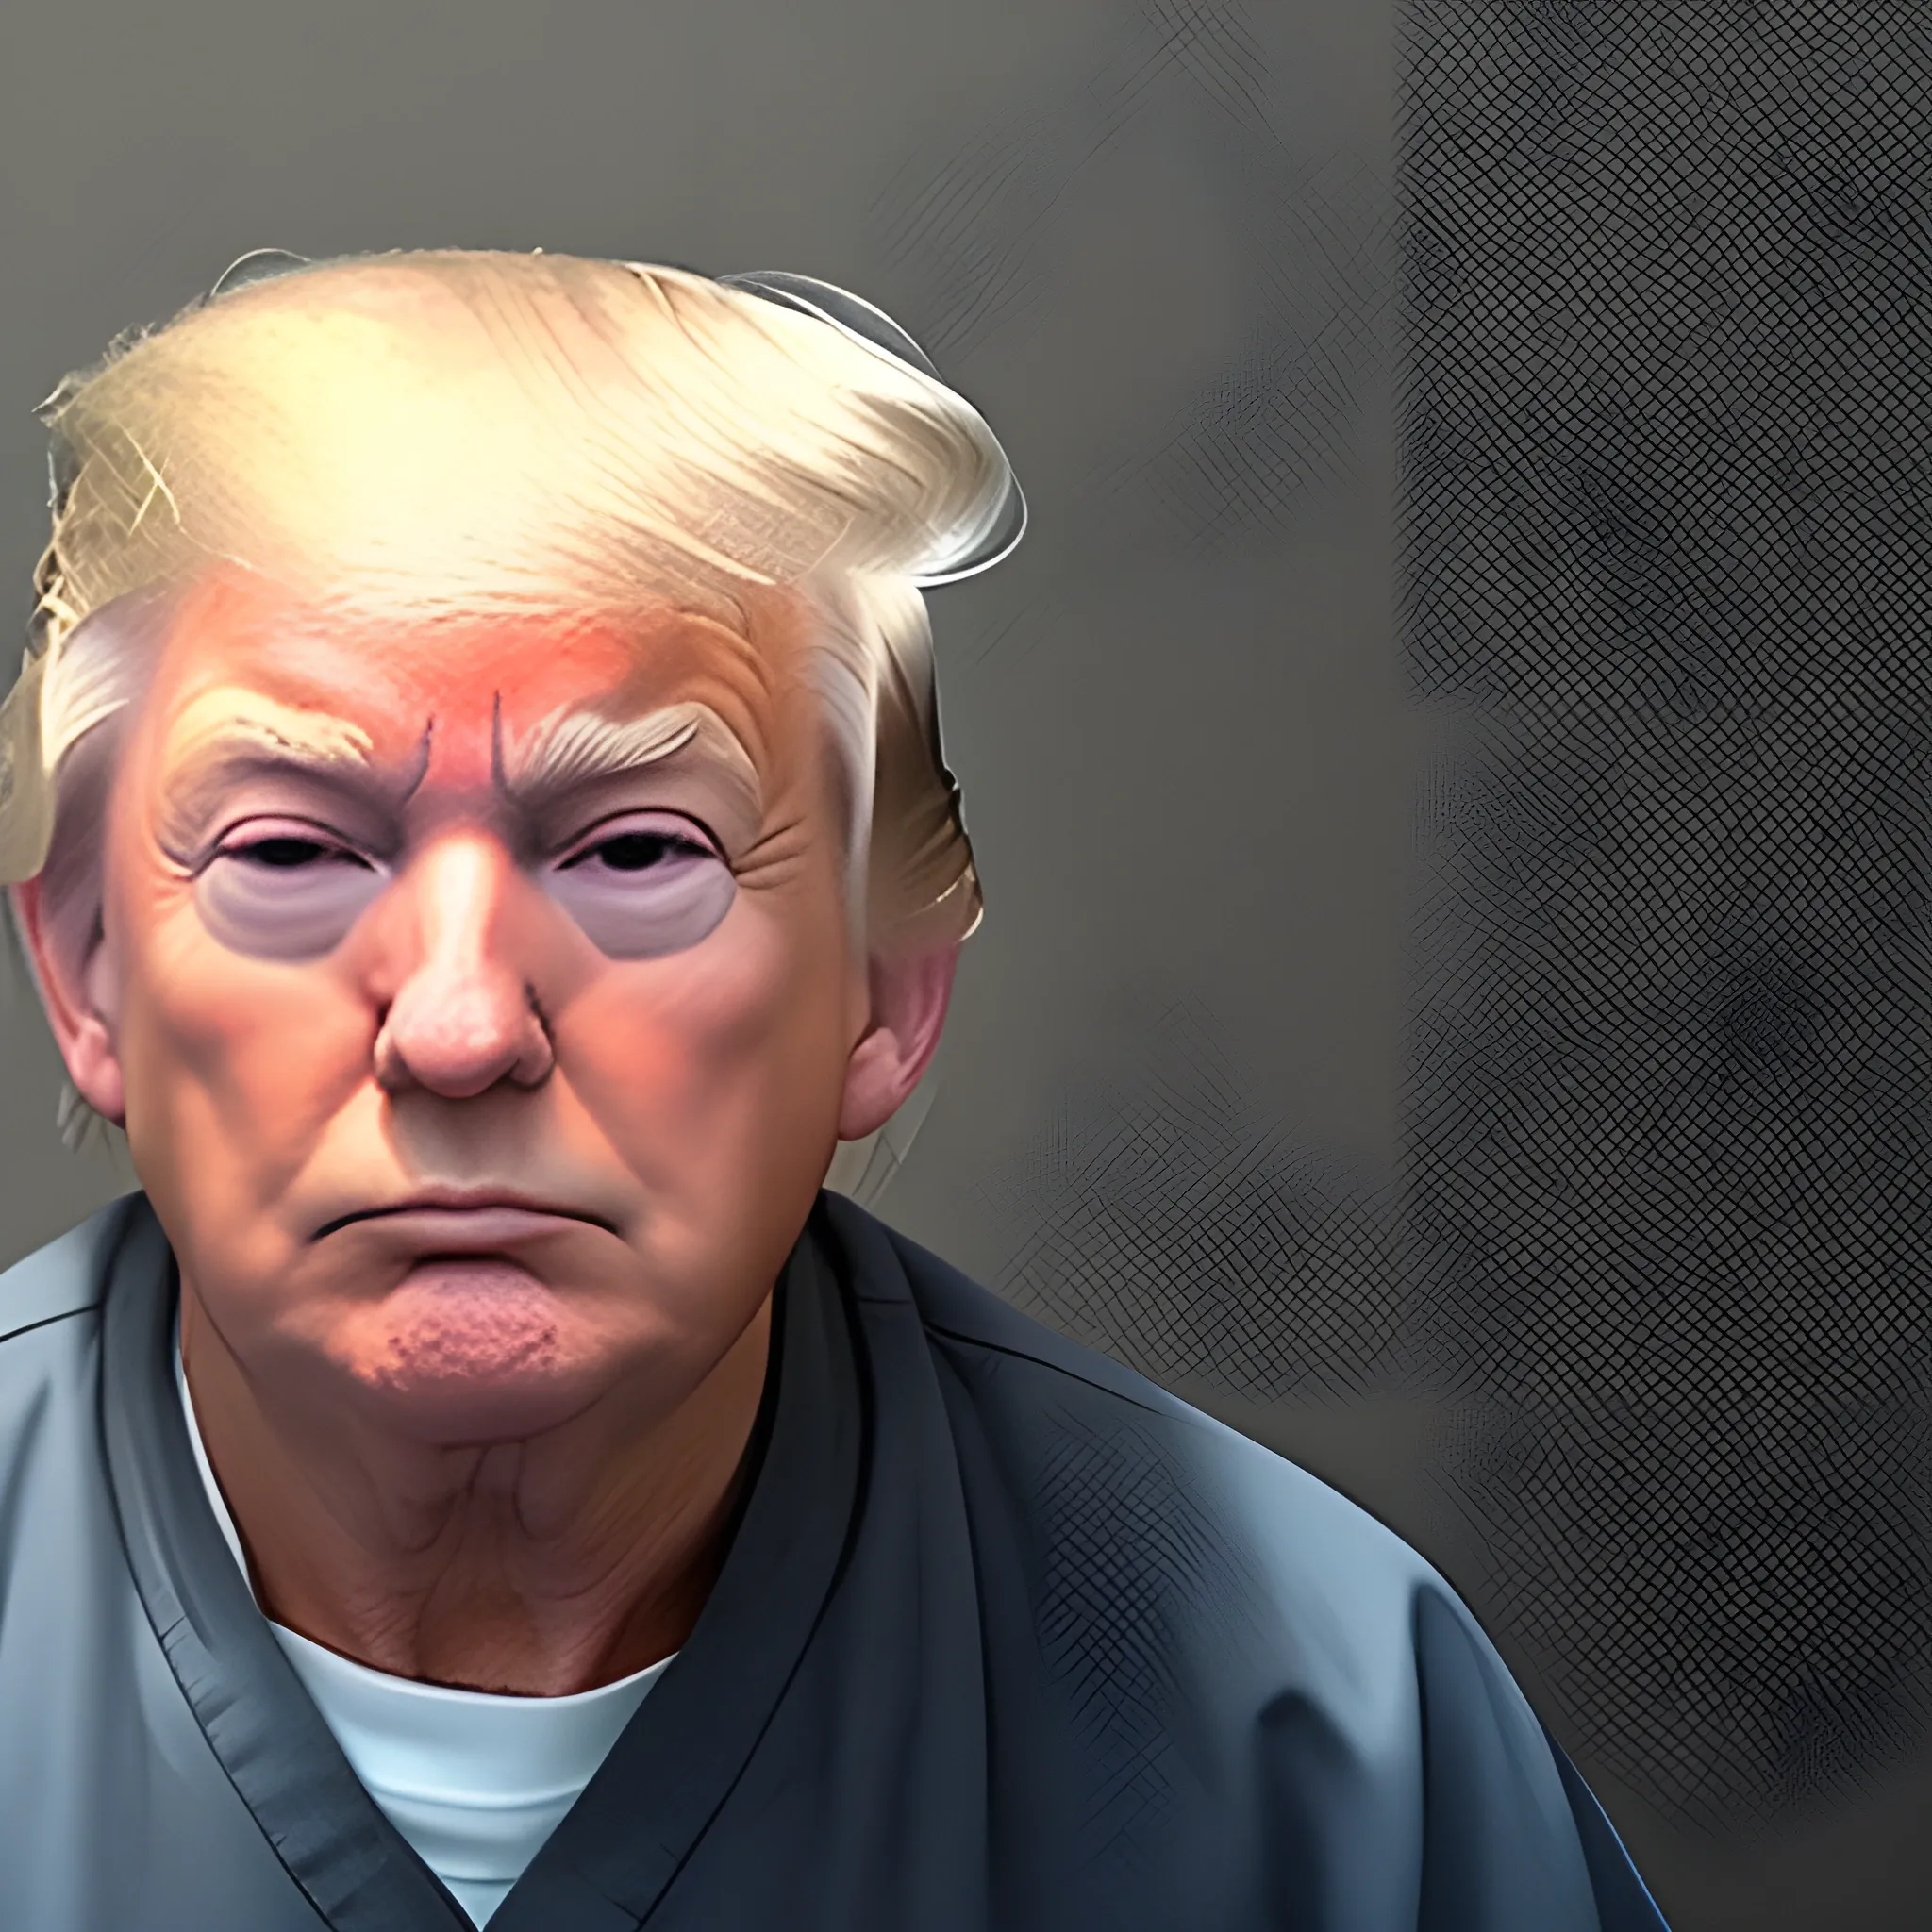 Replace Trump's face in viral G7 photo with his mugshot